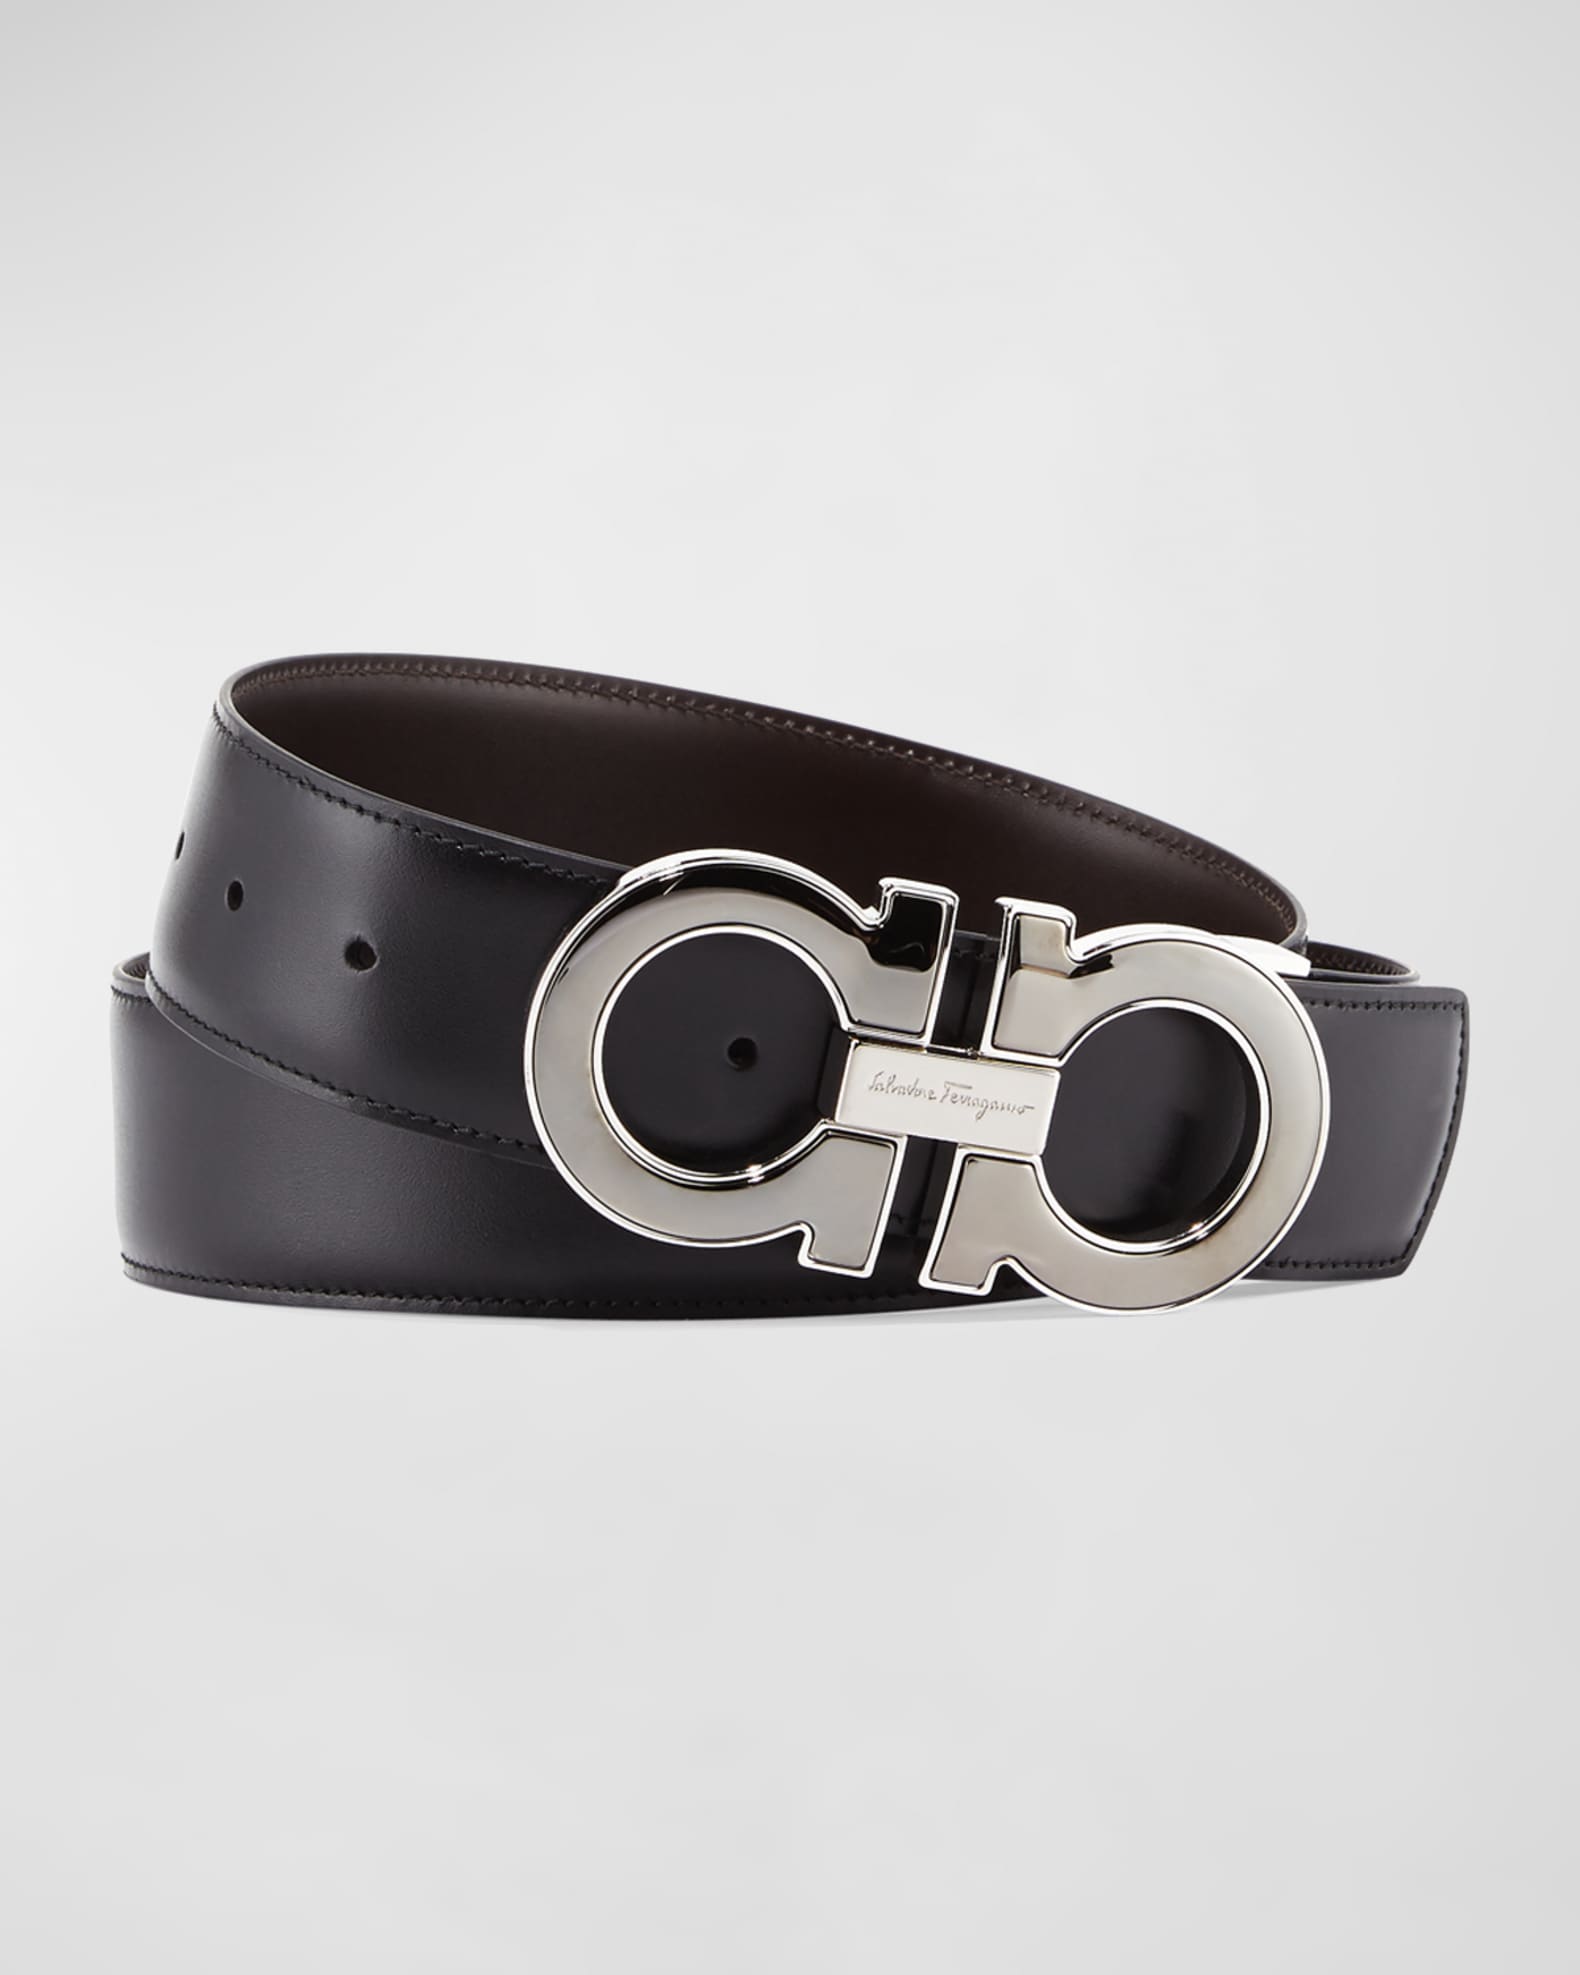 Customizable Men's Belts from Louis Vuitton and Salvatore